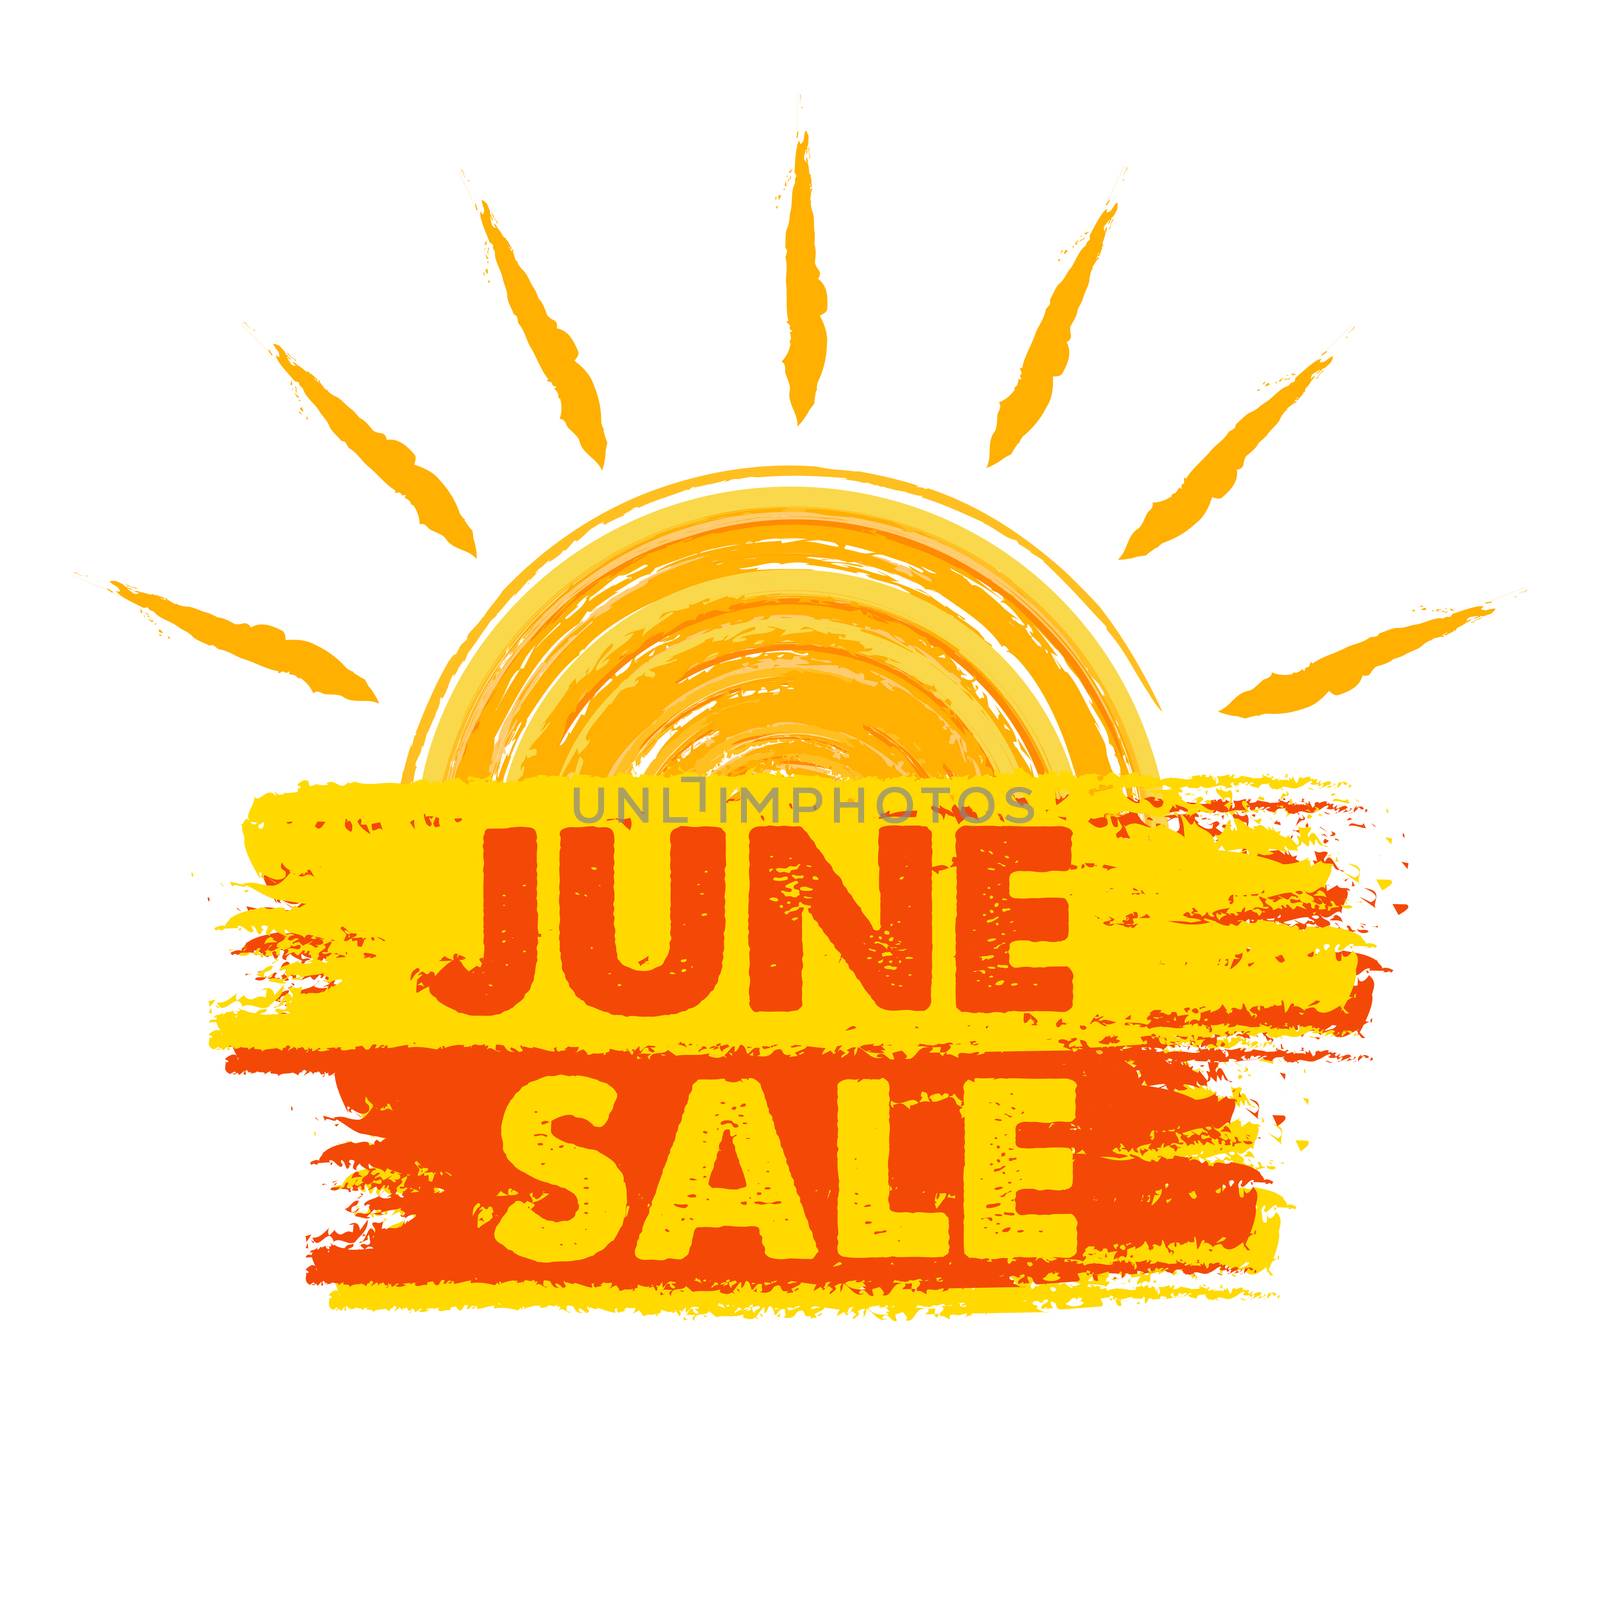 june sale with sun sign, yellow and orange drawn label by marinini